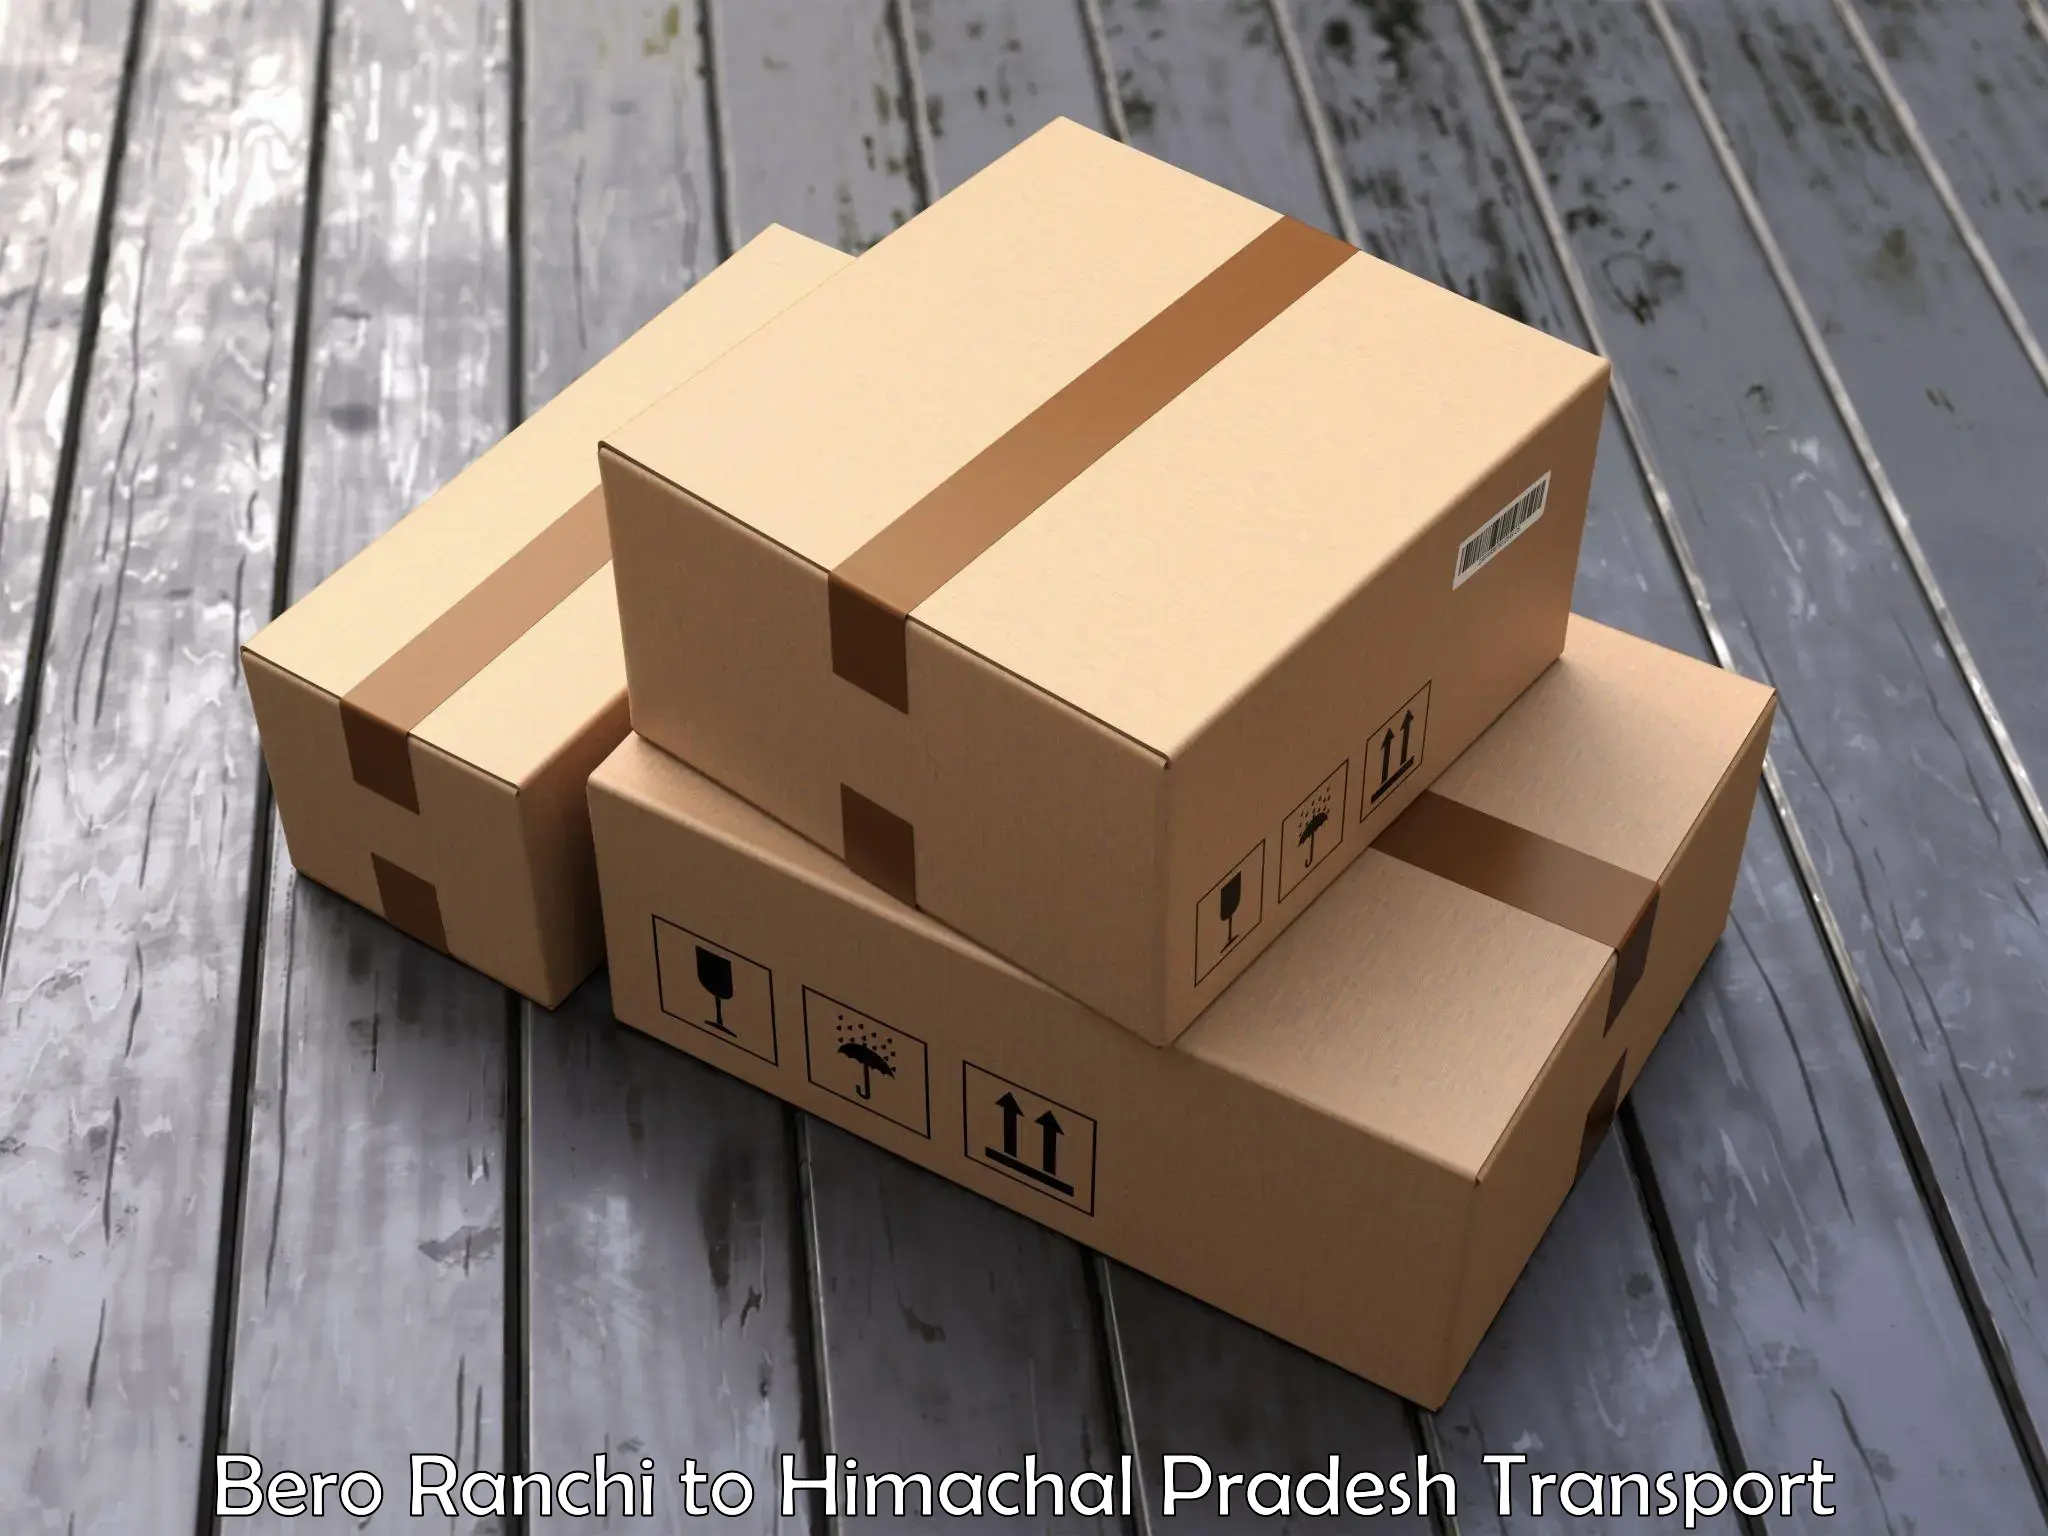 Package delivery services Bero Ranchi to Jaisinghpur